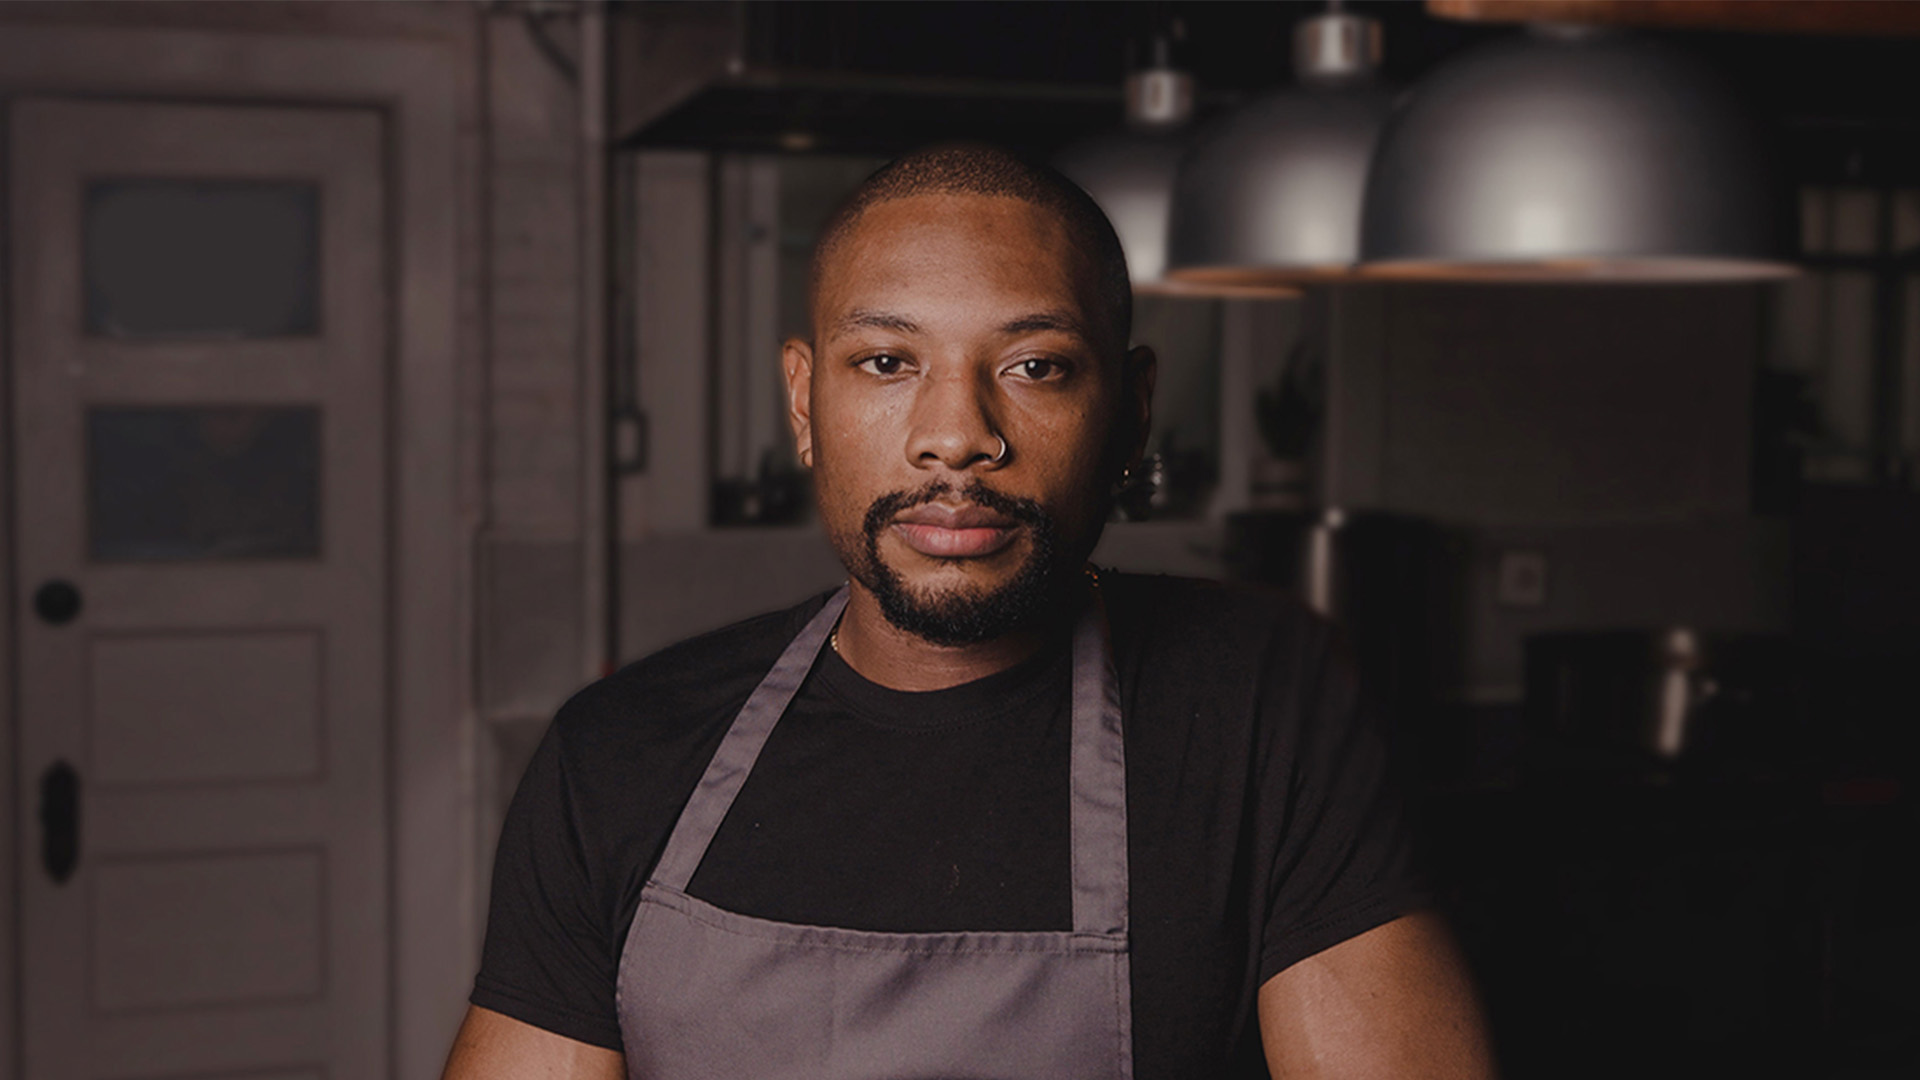 Charlie Mitchell Leveled Up In The Kitchen And Became The First Black Michelin-Starred Chef In New York City